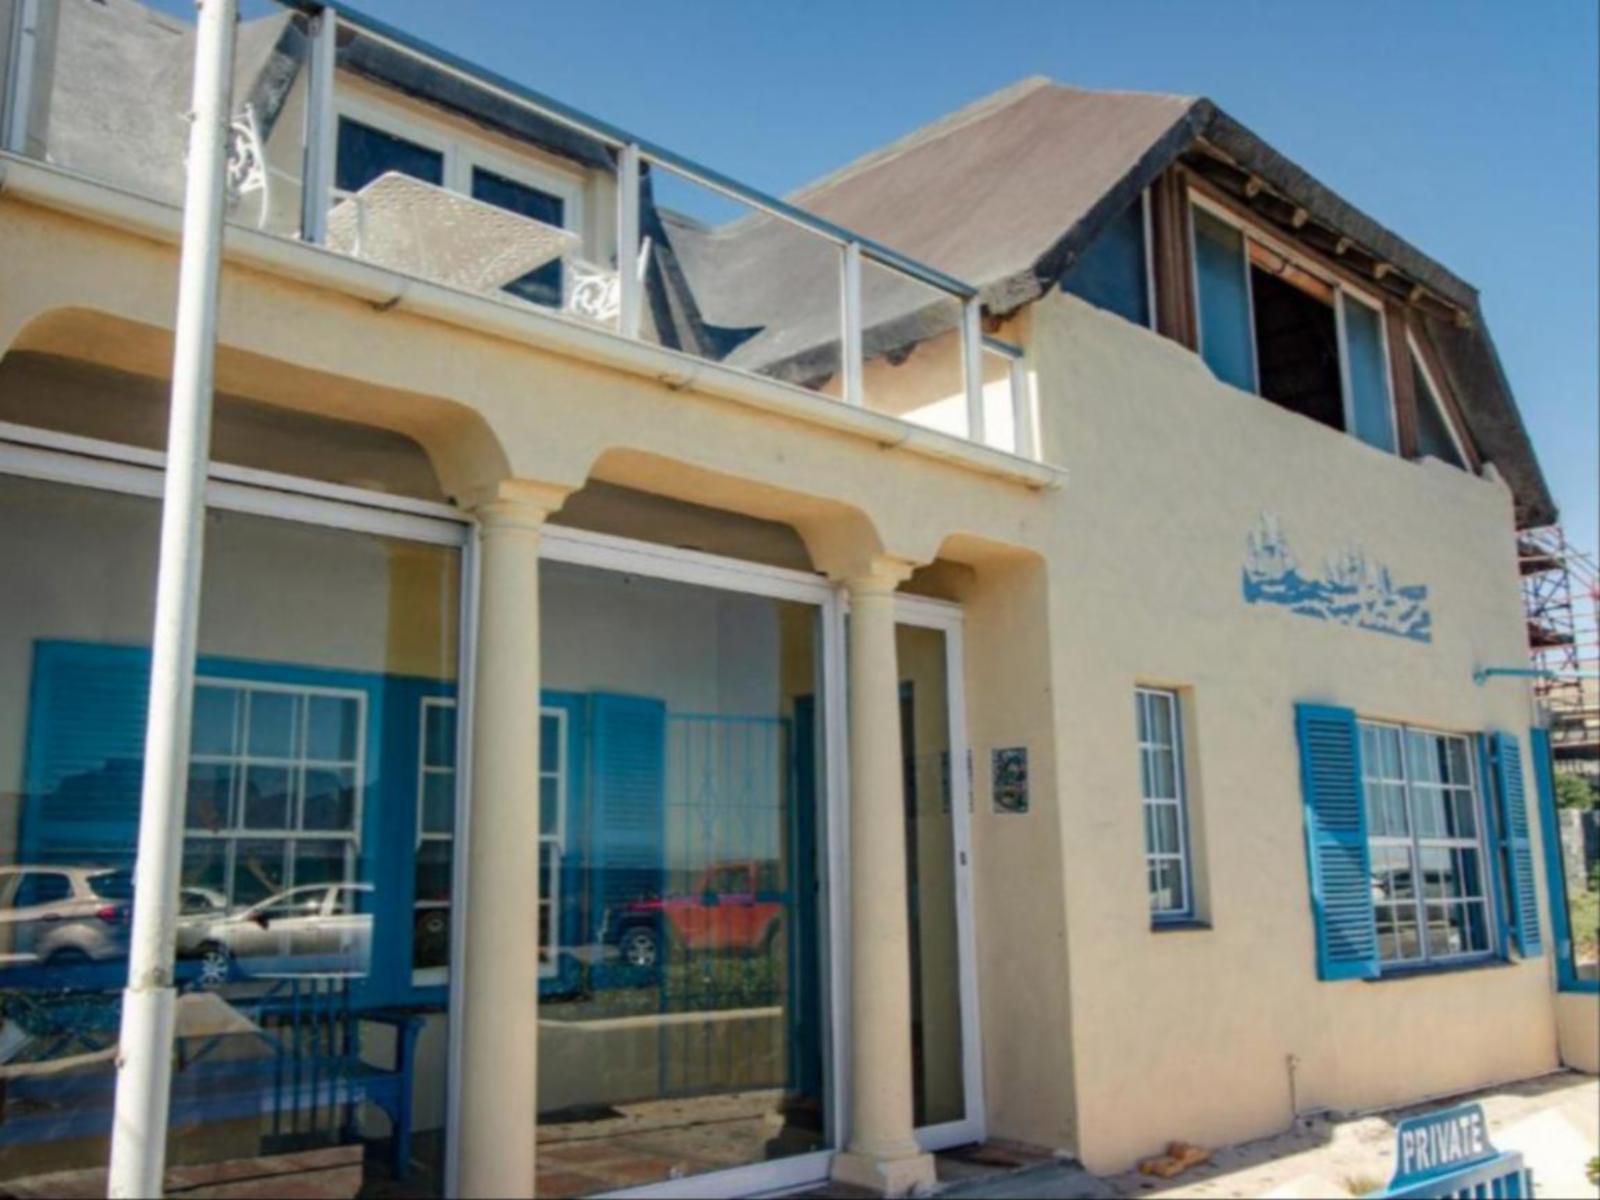 Blaauw Village Luxury Boutique Guest House Bloubergstrand Blouberg Western Cape South Africa House, Building, Architecture